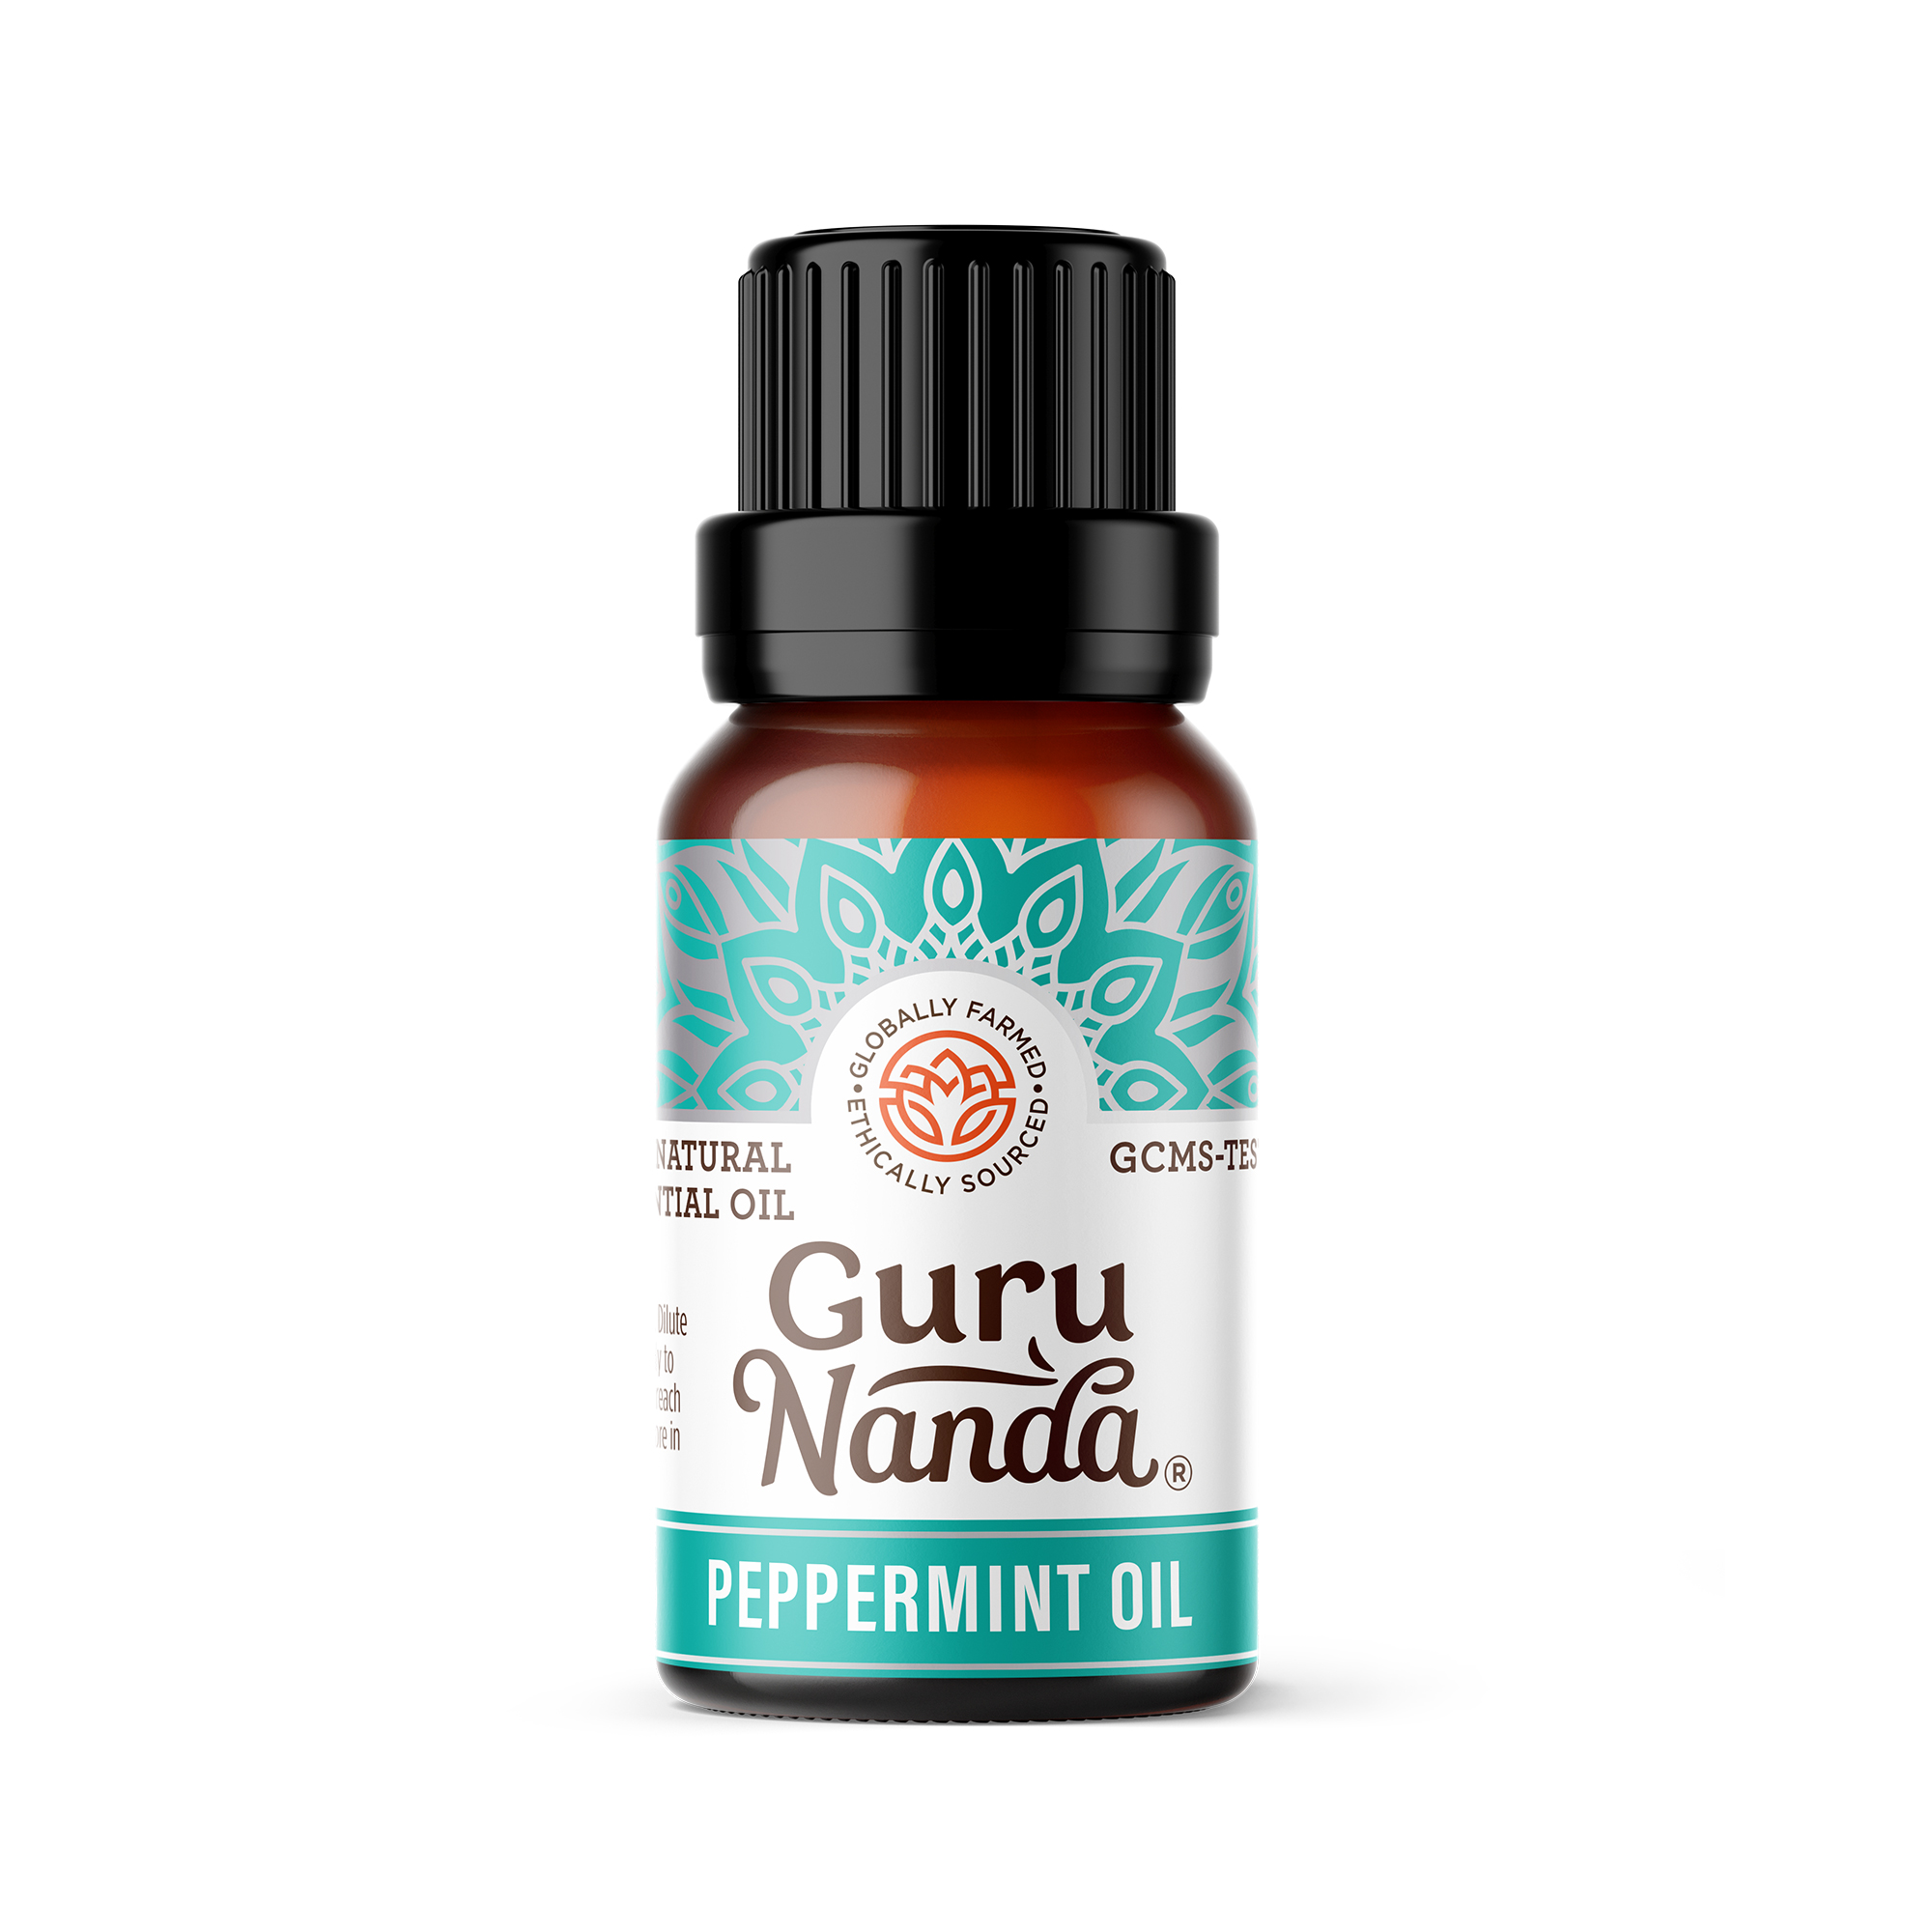 GuruNanda 100% Pure and Natural Peppermint Oil for Aromatherapy, & Diffuser - 15ml - image 1 of 9